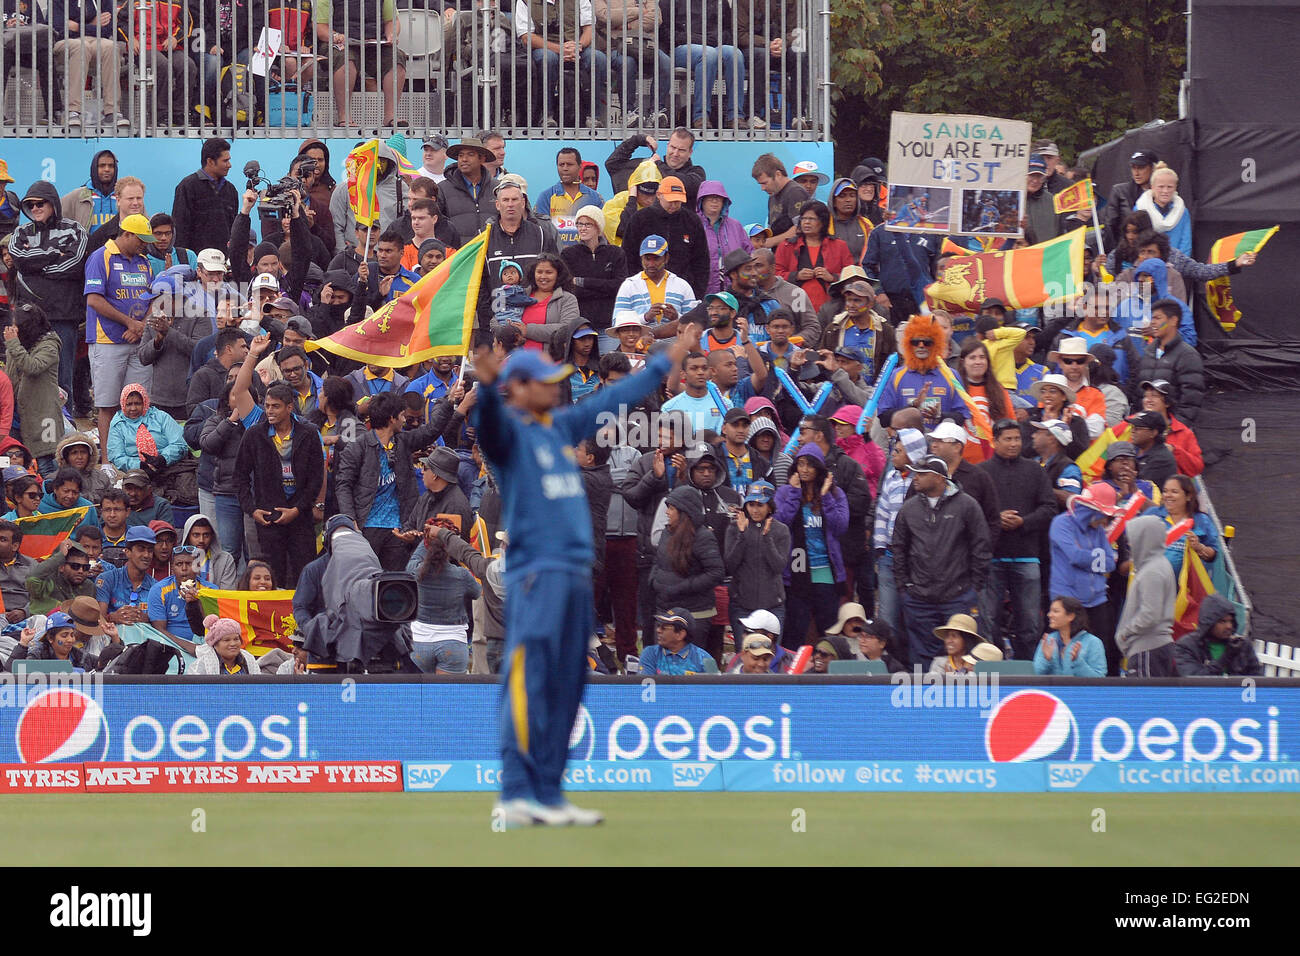 Christchurch, New Zealand - February 14, 2015 - Fans of Sri Lanka celebrating during the ICC Cricket World Cup Match between Sri Lanka and New Zealand at Hagley Oval on February 14, 2015 in Christchurch, New Zealand, crowd. Stock Photo